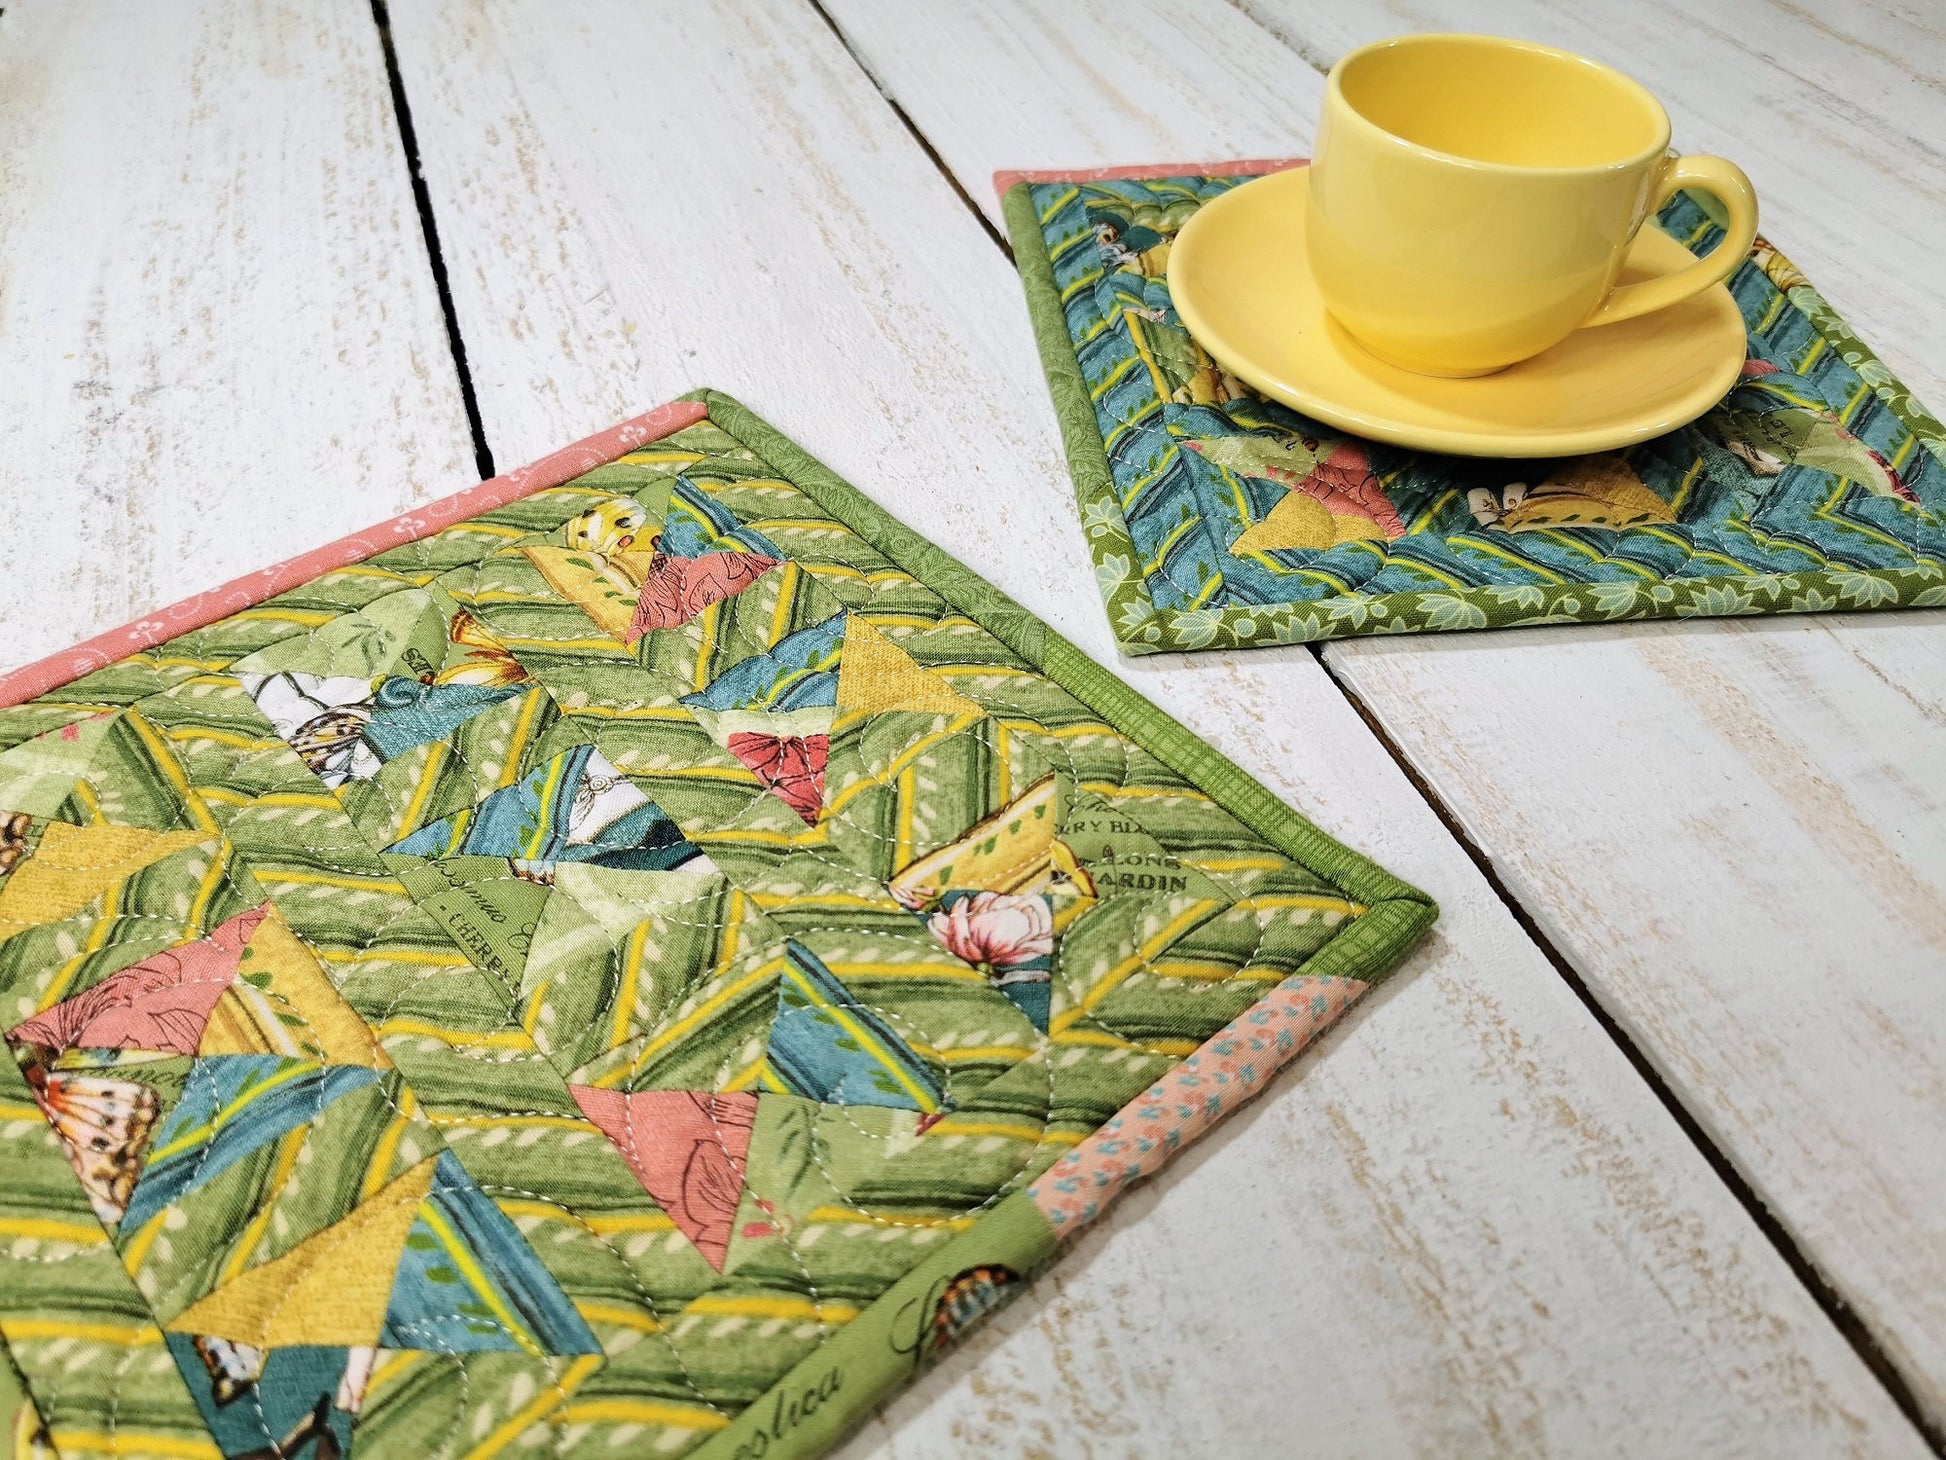 two potholders on white wooden table with small yellow mug and saucer in background